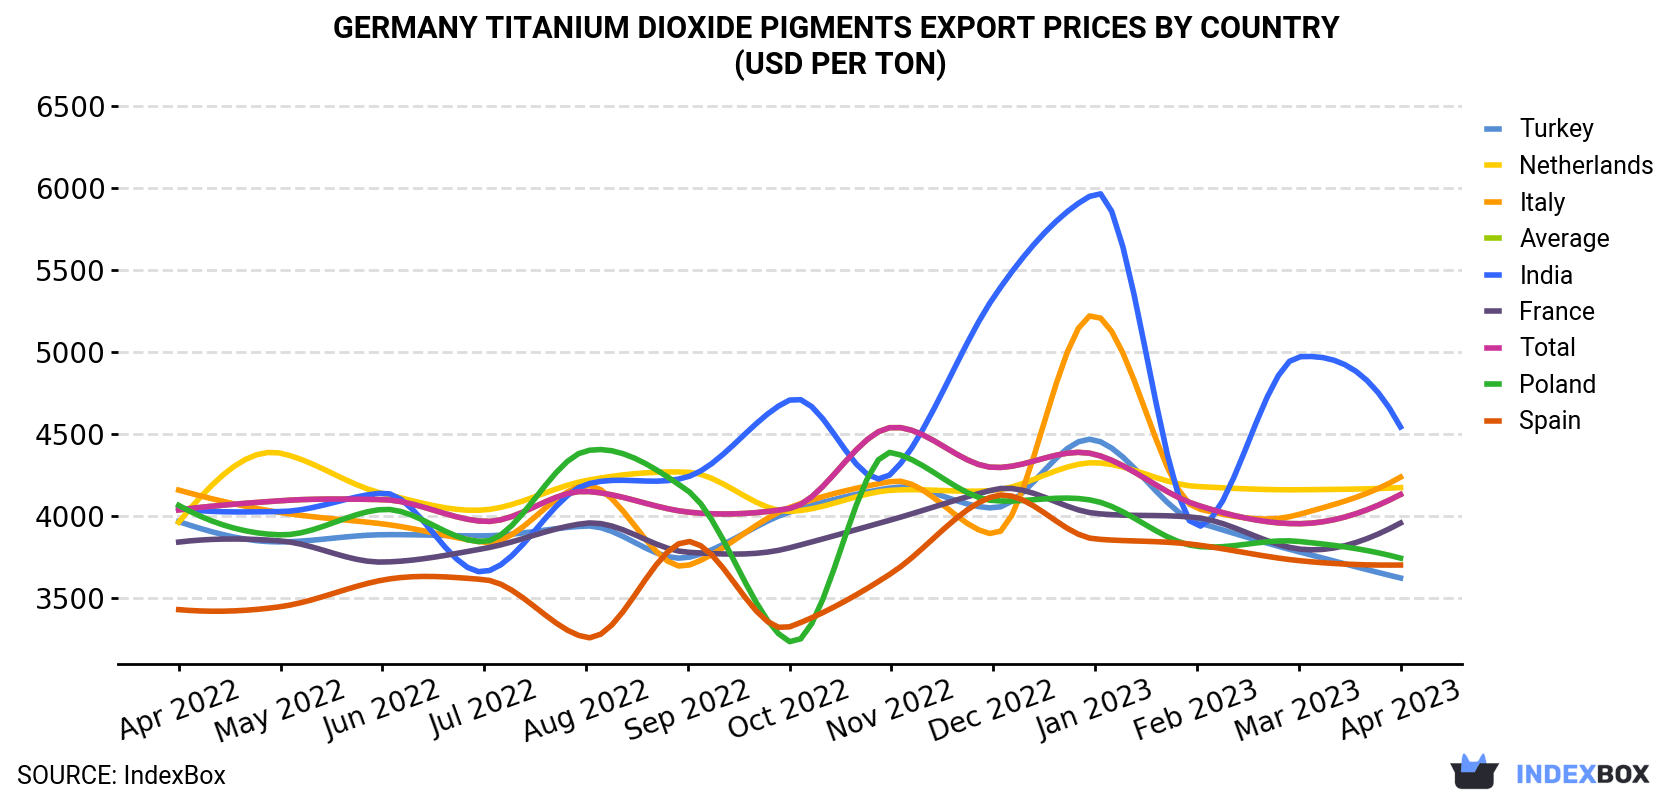 Germany Titanium Dioxide Pigments Export Prices By Country (USD Per Ton)